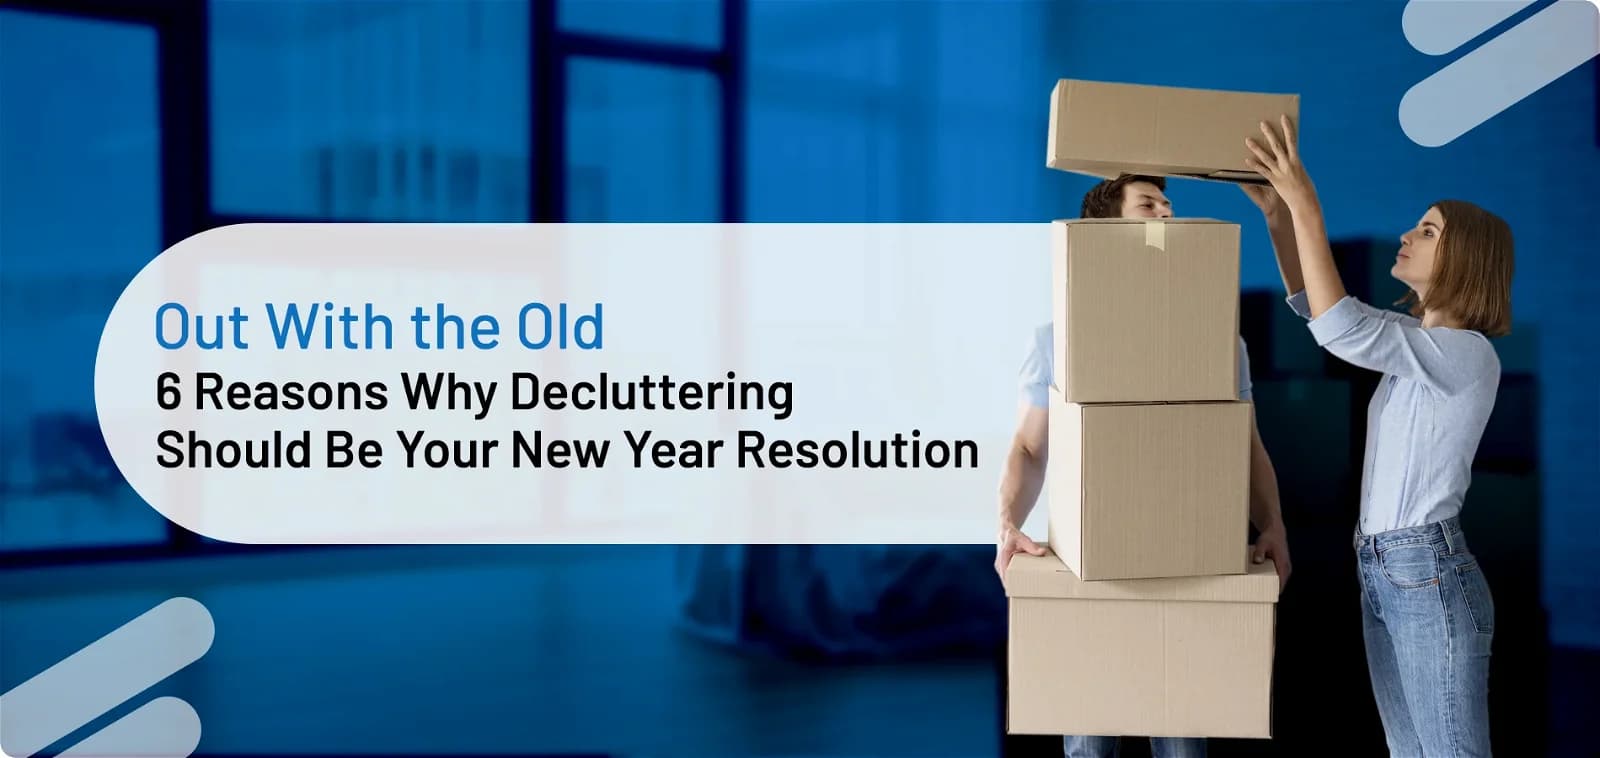 Out With the Old: 6 Reasons Why Decluttering Should Be Your New Year Resolution